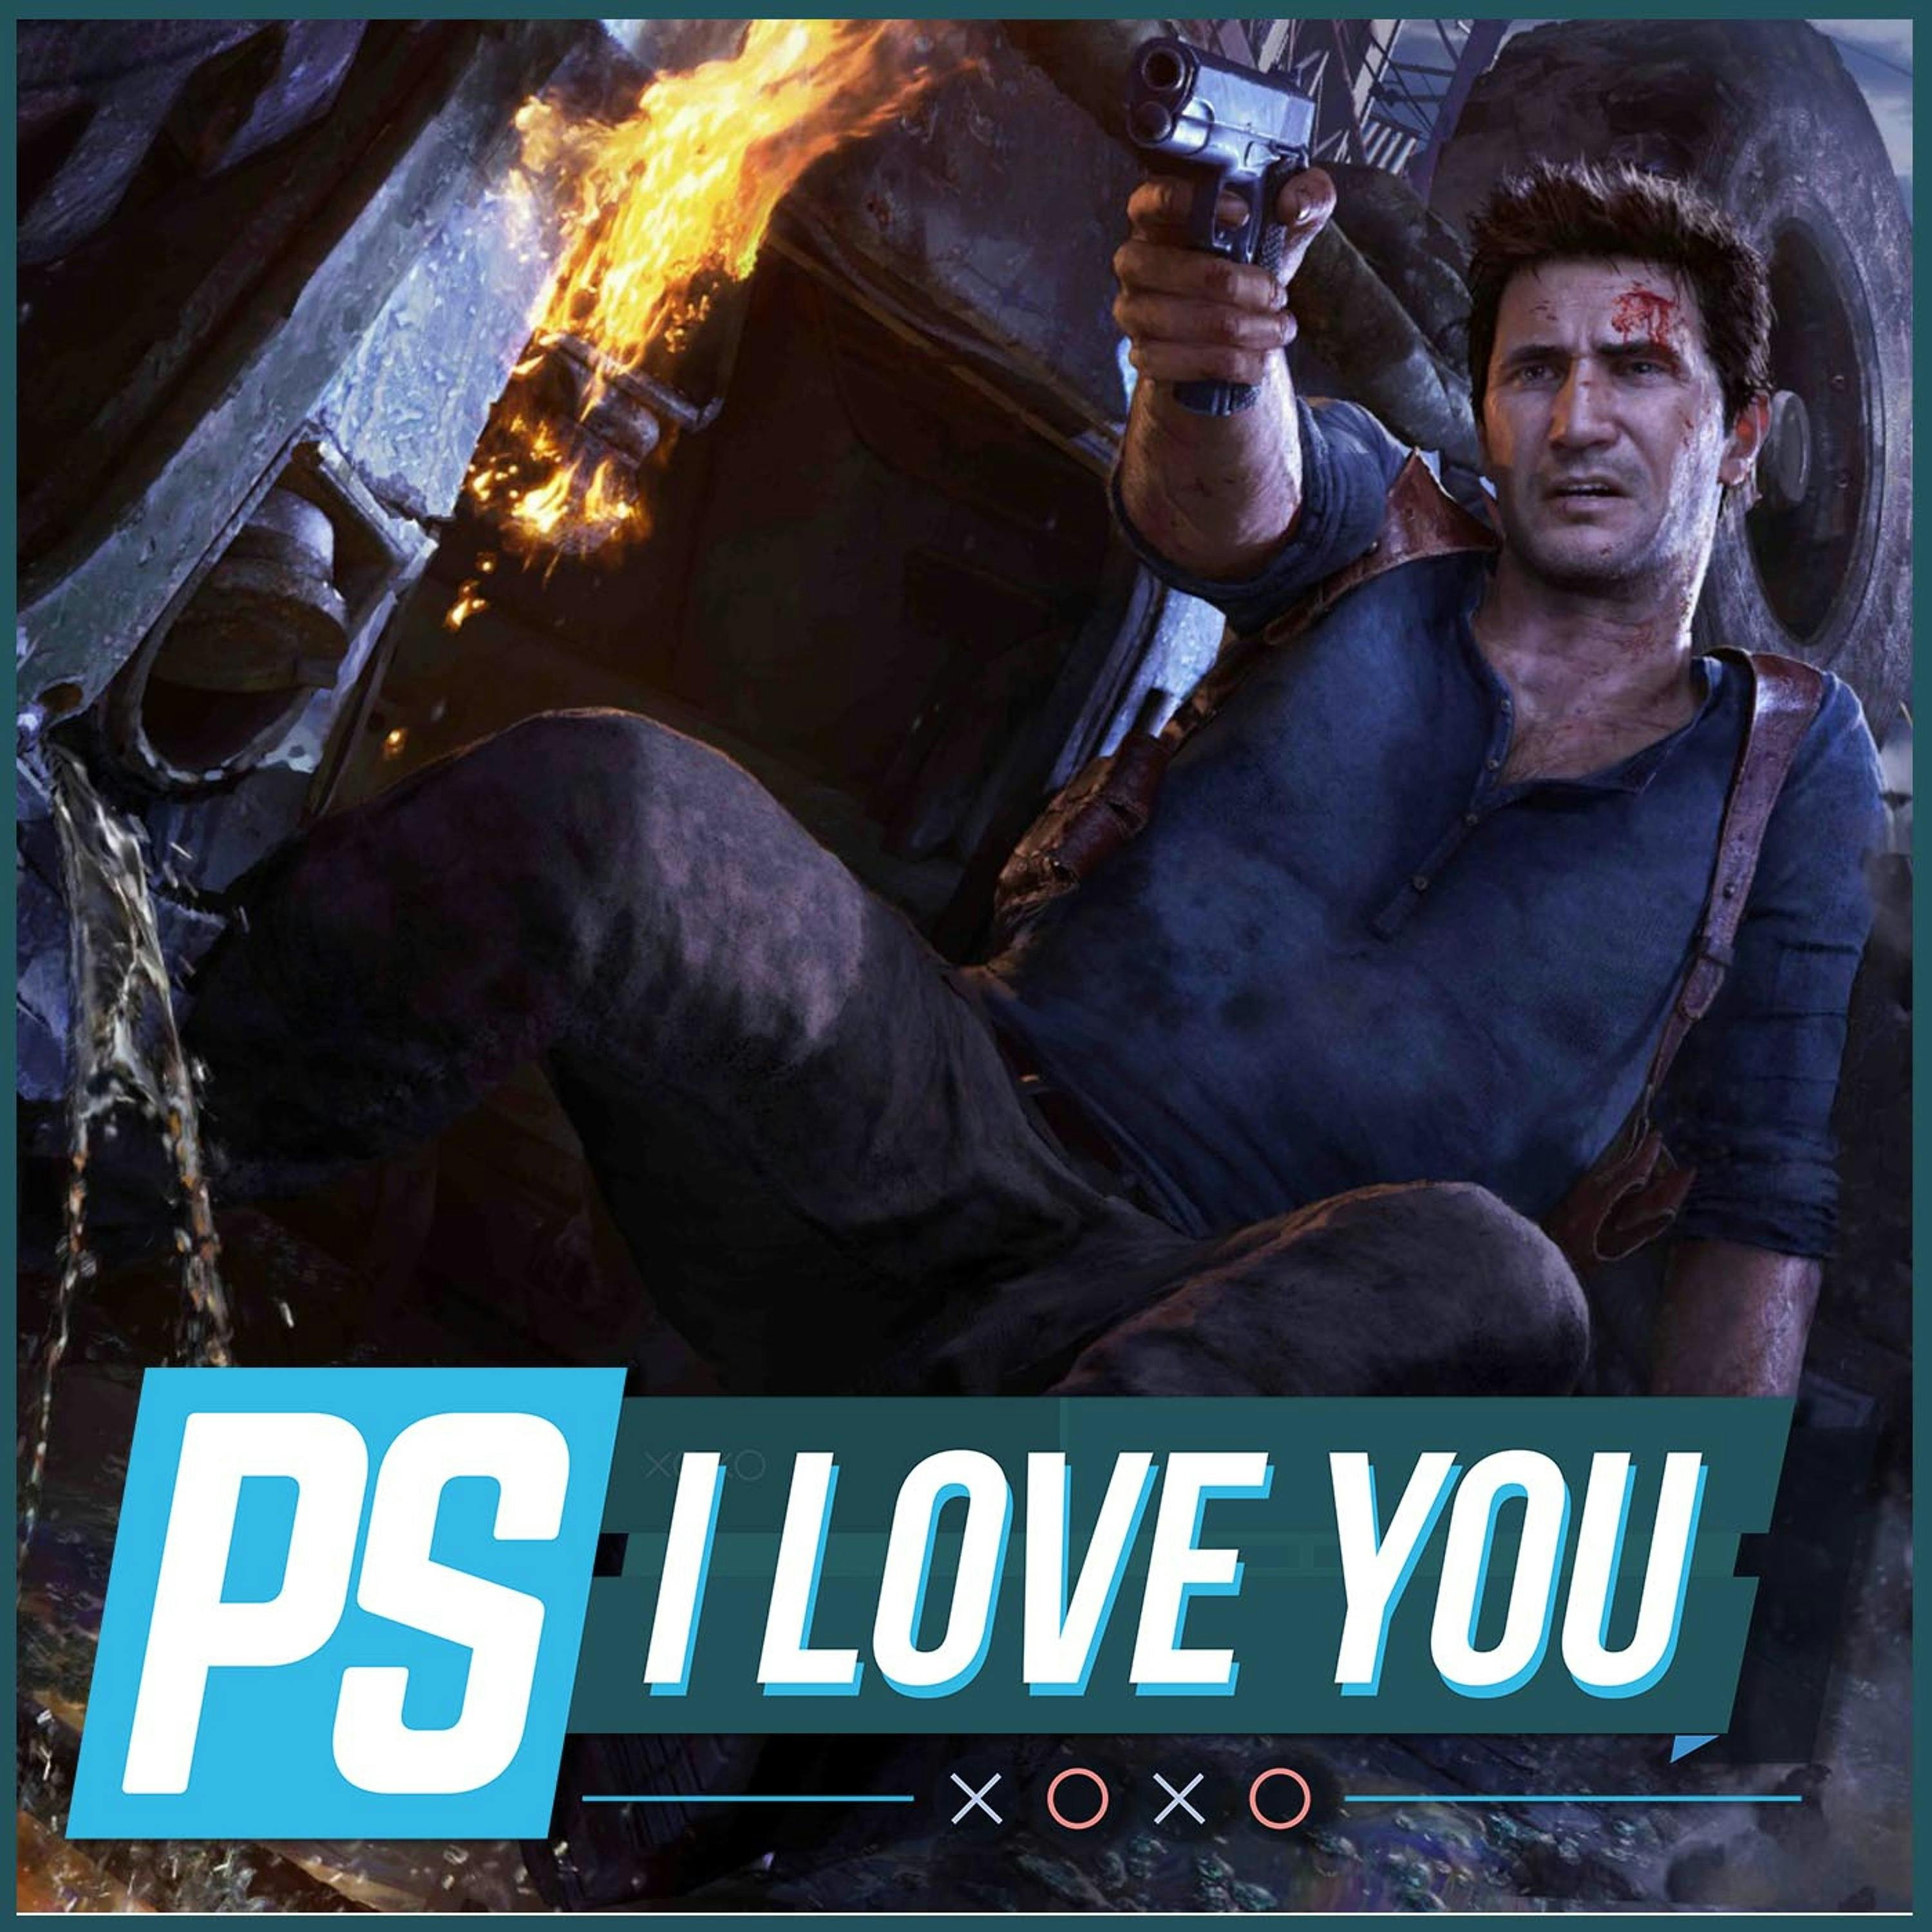 Was Uncharted Worth It? - PS I Love You XOXO Ep. 56